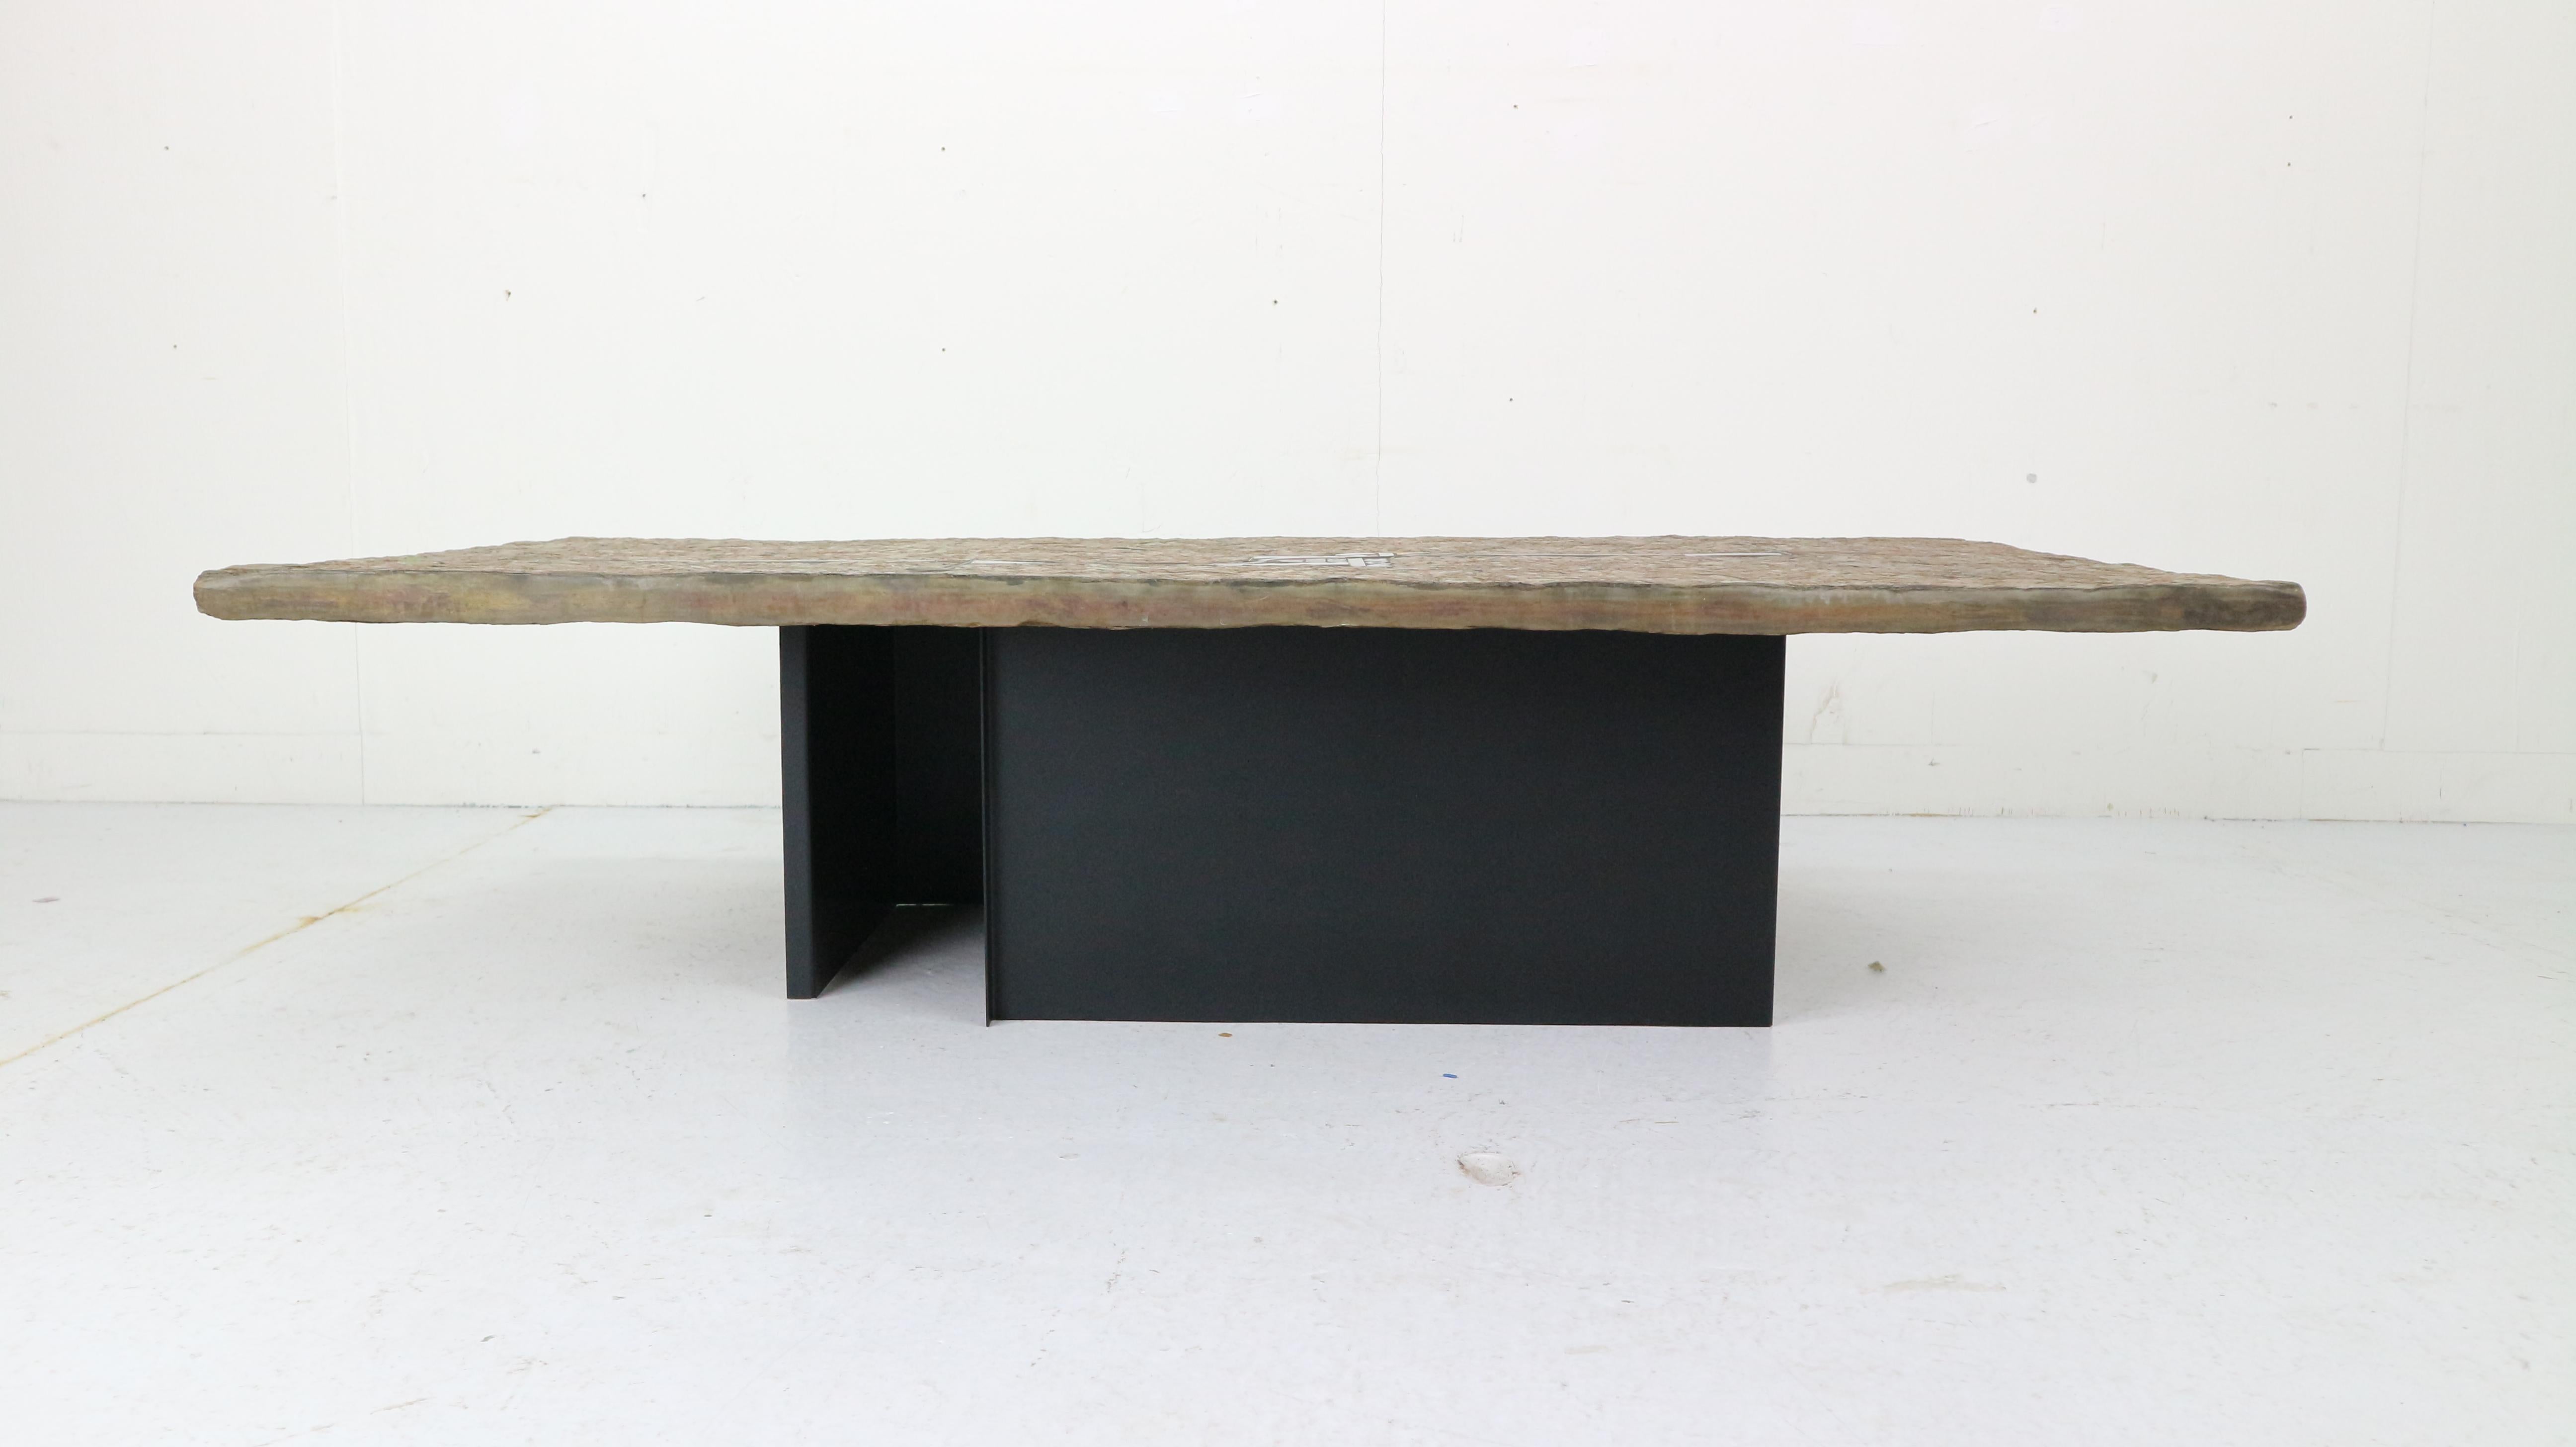 Fantastic and unique Paul Kingma ceramic art slate coffee table with metal foot. Made and signed in the 1980s. Paul Kingma was a famous Dutch sculptor. No other table has the same unique inlay as the table is one-off.

The table features a